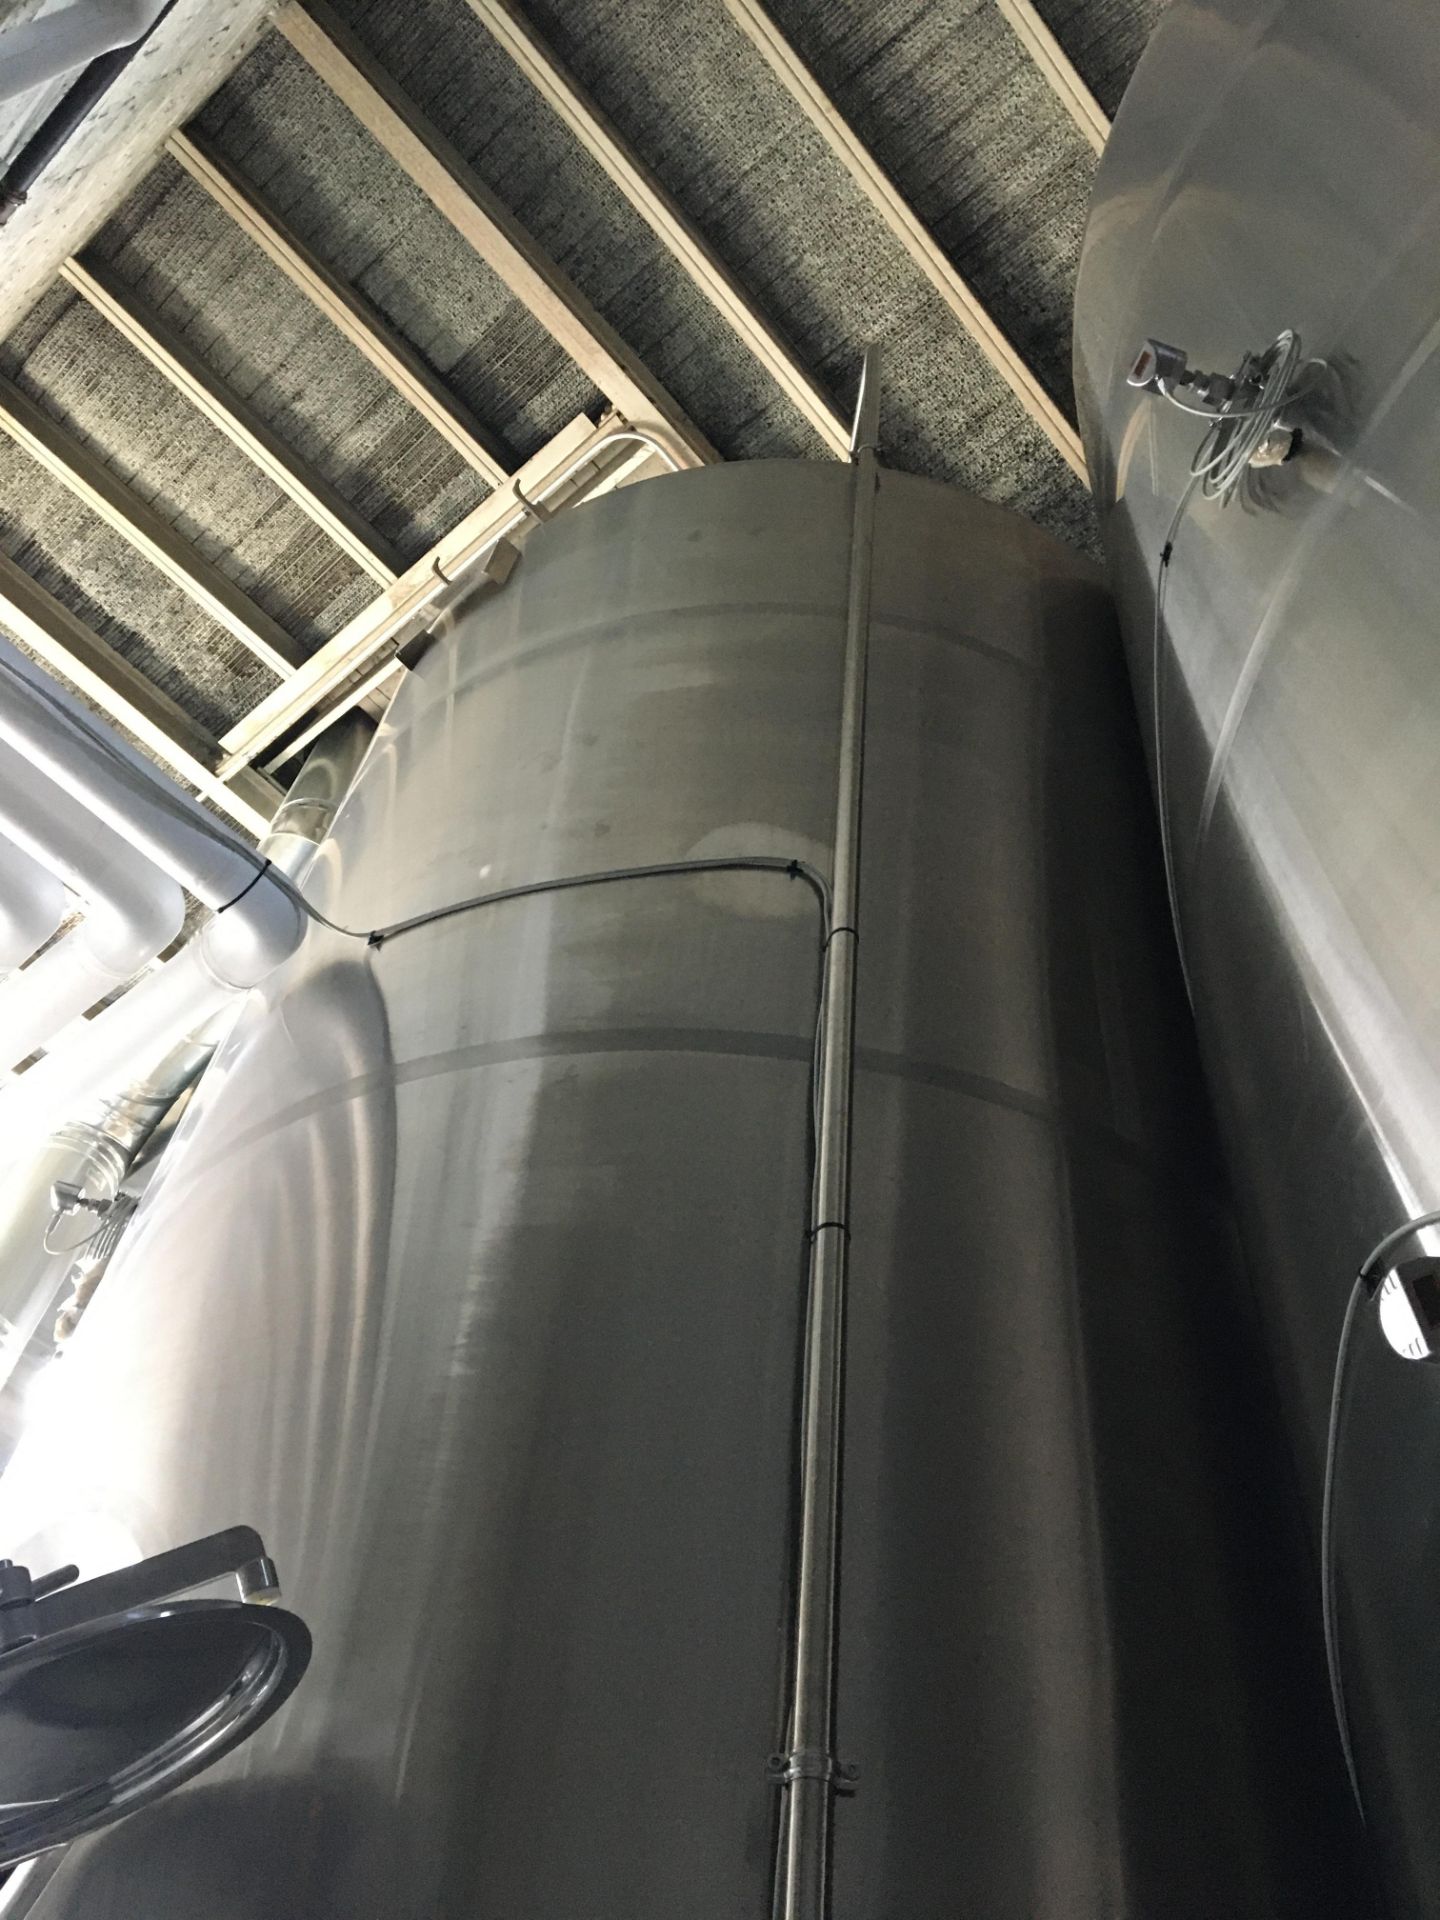 80-BBL Minnetonka Fermentation Tank, Model 80-BBL, Year 2017, Stainless Steel; Vessel store wort and - Image 8 of 9